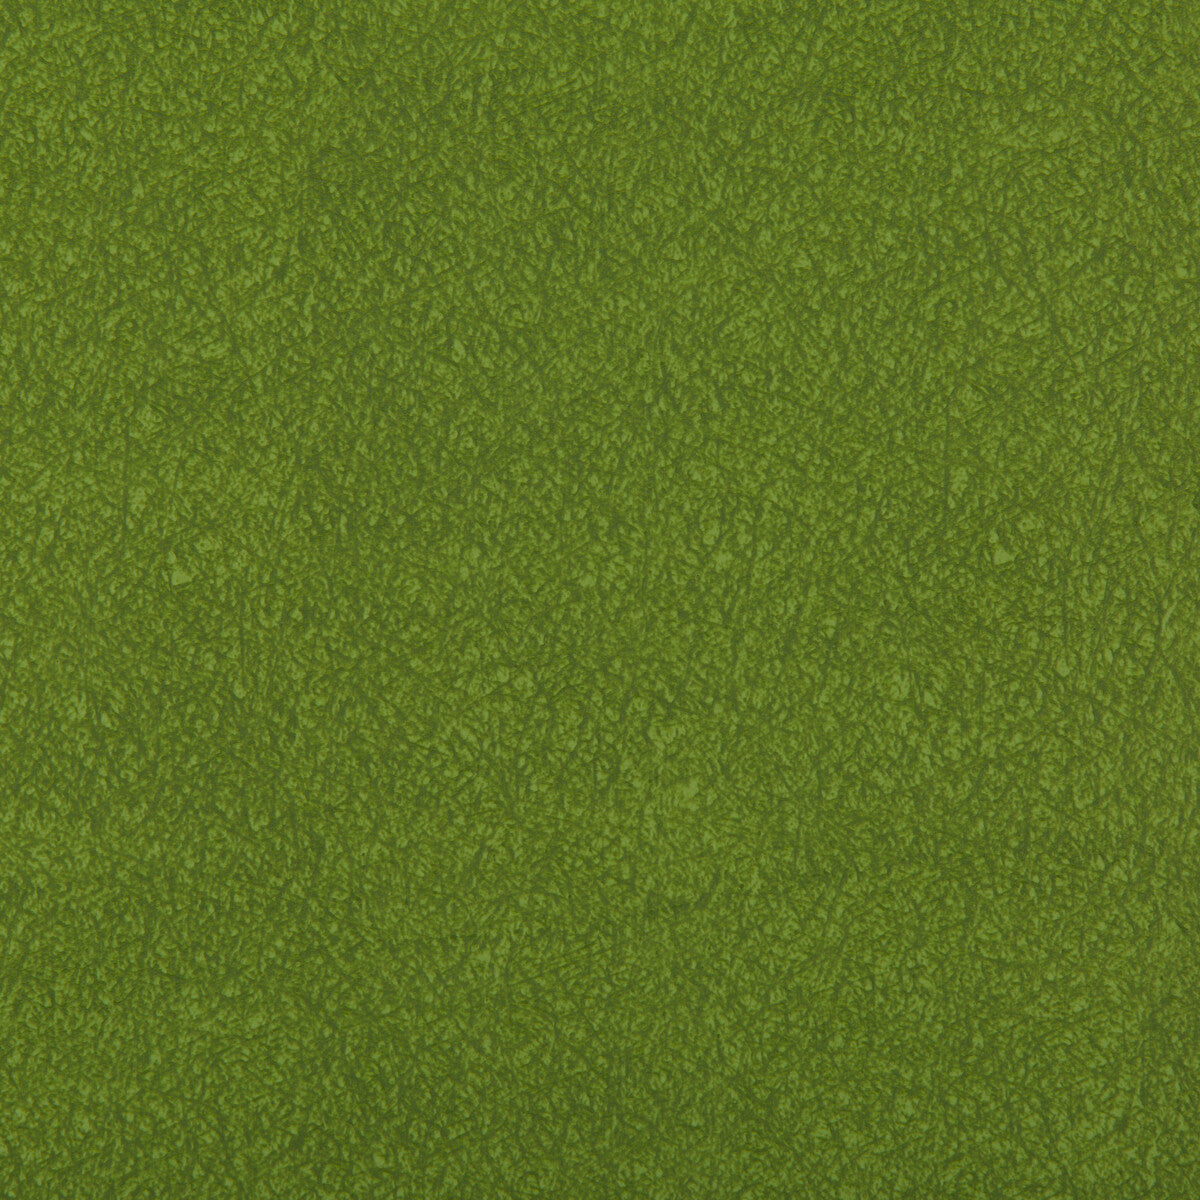 Ames fabric in moss color - pattern AMES.303.0 - by Kravet Contract